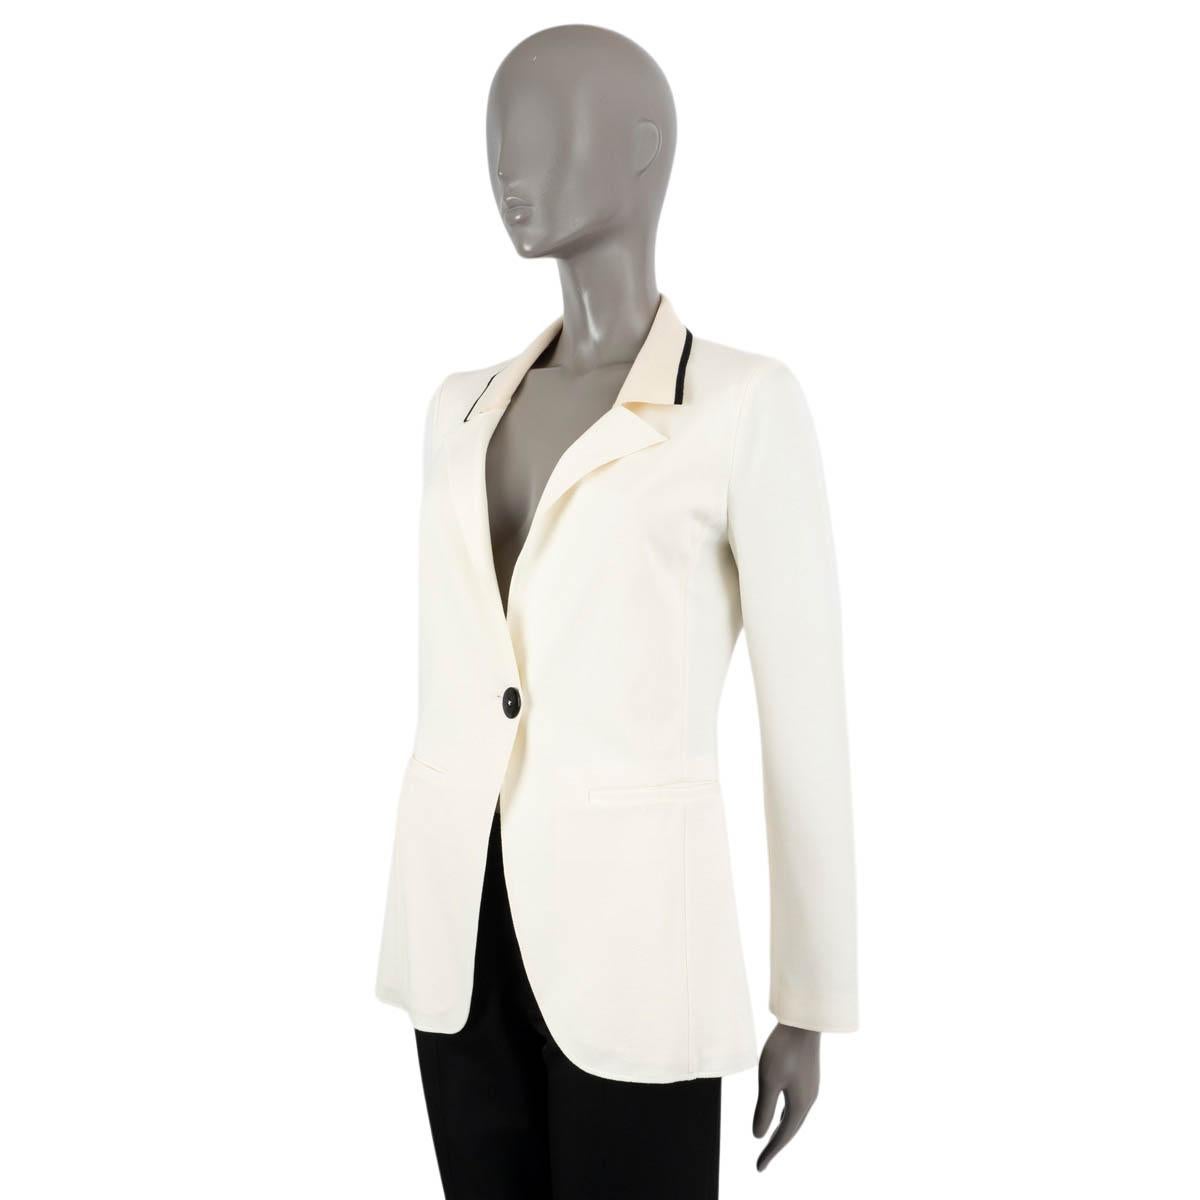 GIORGIO ARMANI ivory jersey KNIT COLLAR Blazer Jacket 42 M In Excellent Condition For Sale In Zürich, CH